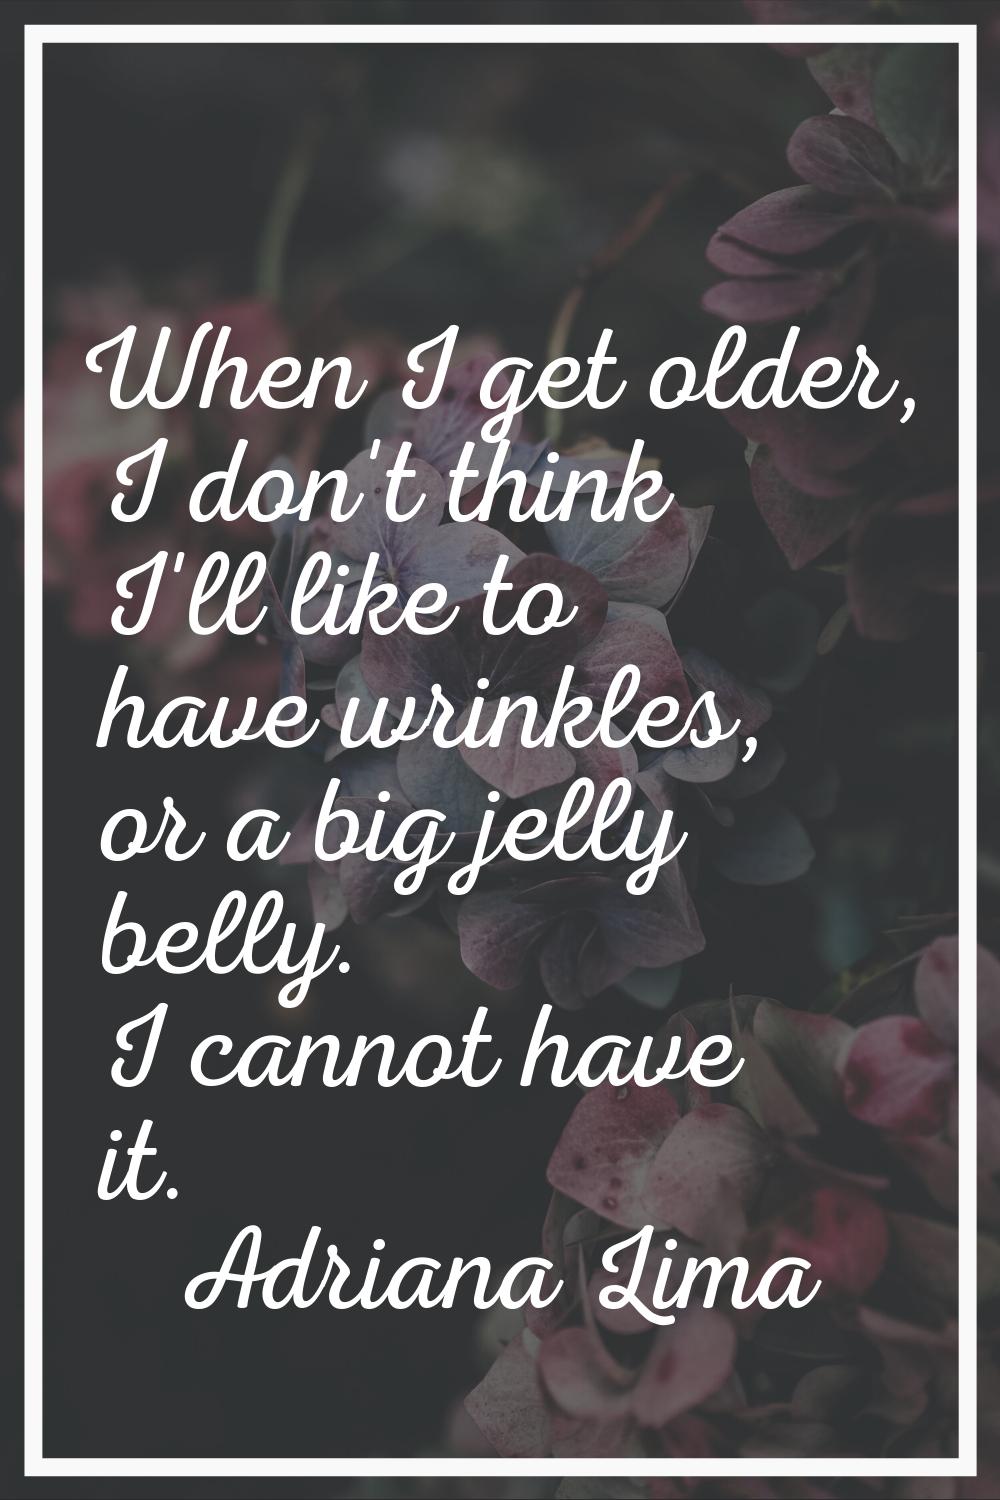 When I get older, I don't think I'll like to have wrinkles, or a big jelly belly. I cannot have it.